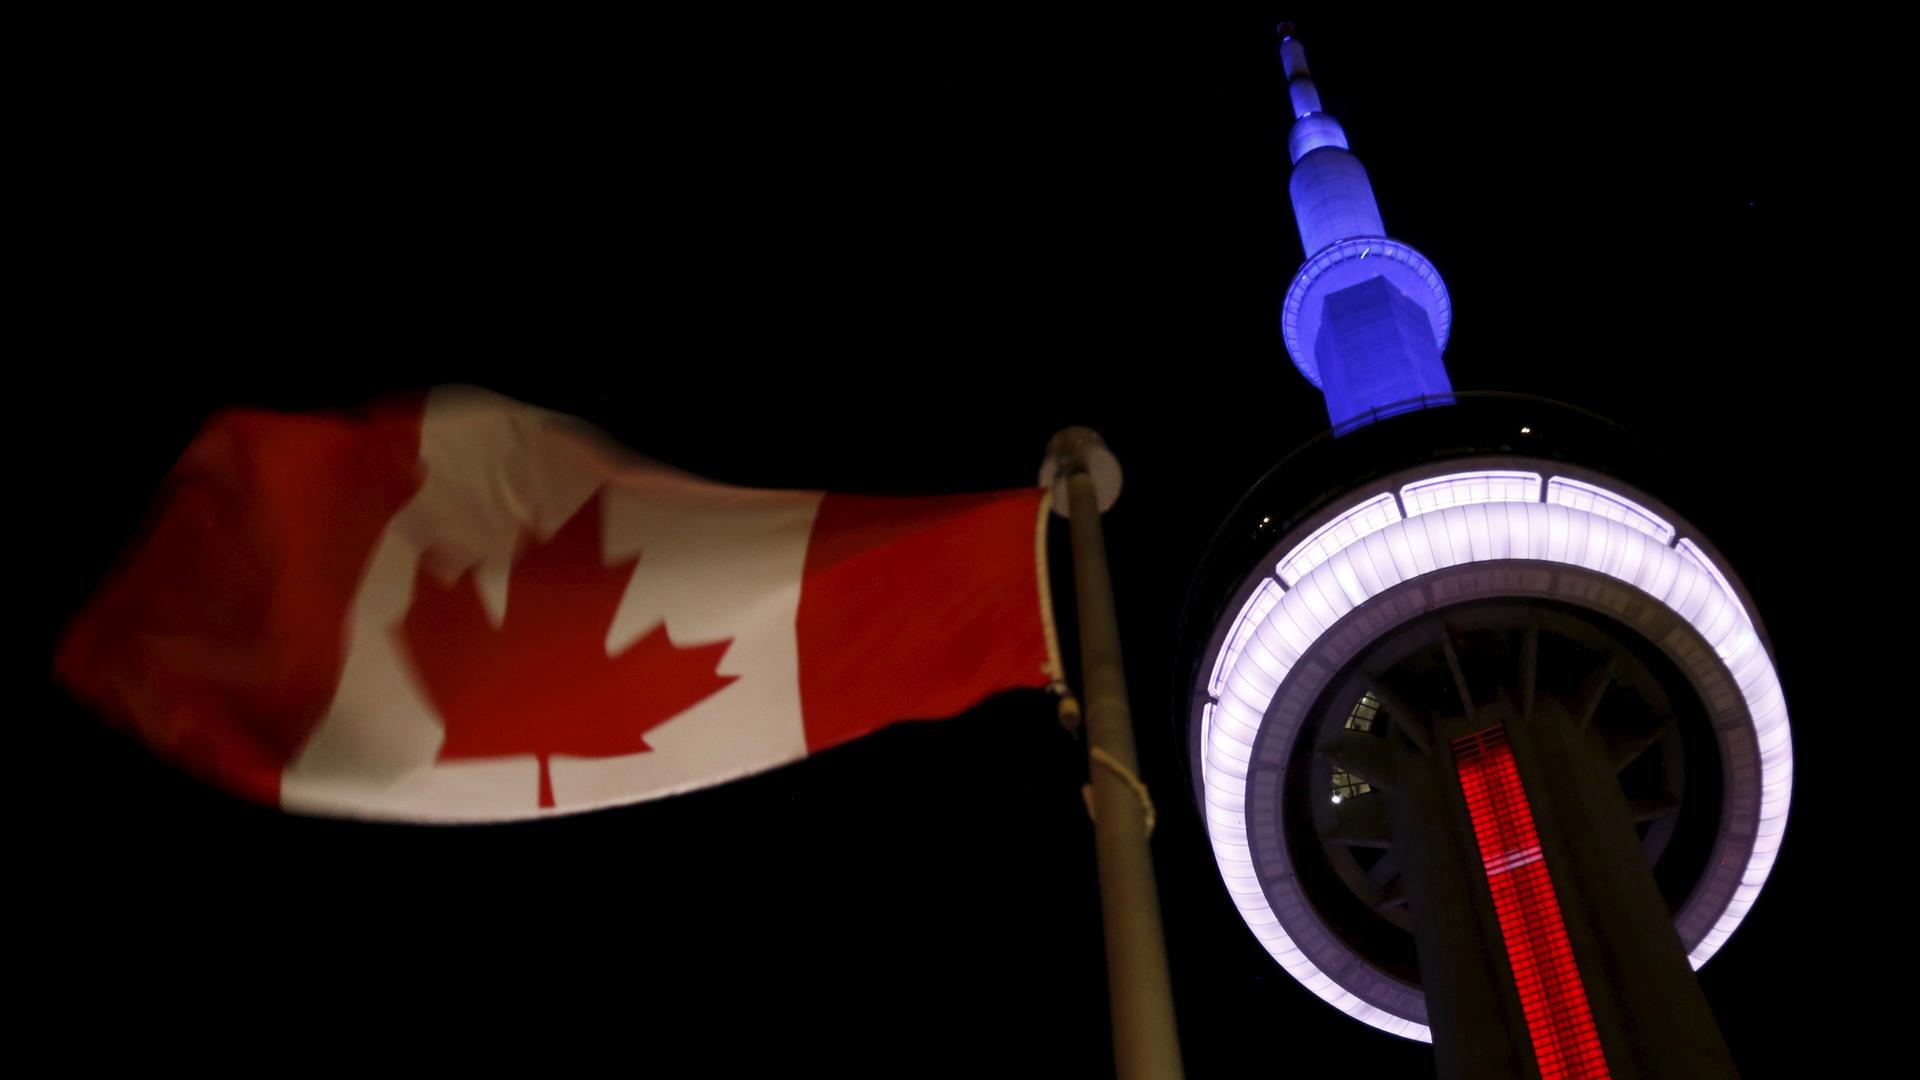 The landmark CN Tower is lit blue, white and red in the colors of the French flag following Paris attacks, in Toronto November 13, 2015.